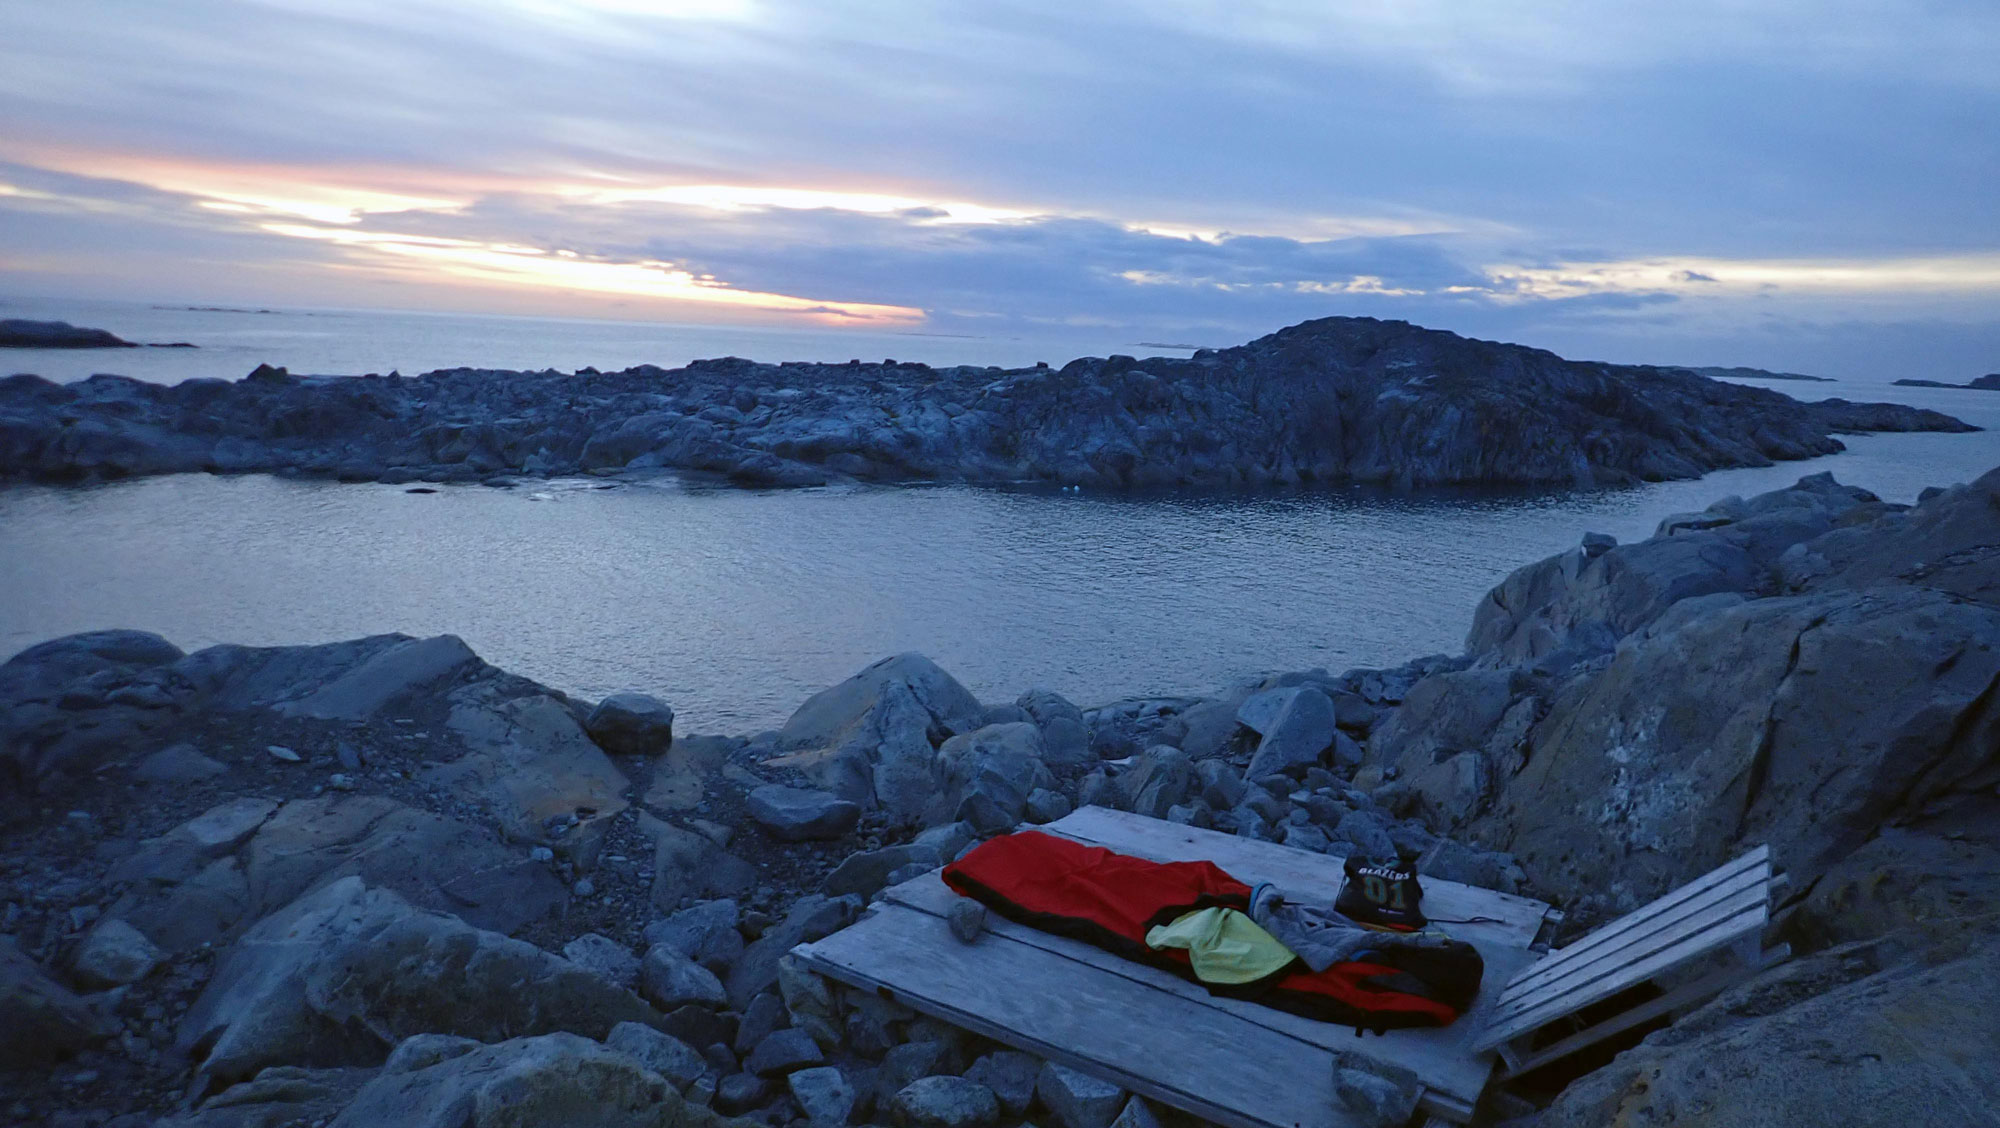 Yellow-lined red bivy sac encasing a blue sleeping bag on wooden platform nestled between rocks as the sunset cast fading light on the clouds over Bonaparte Point.